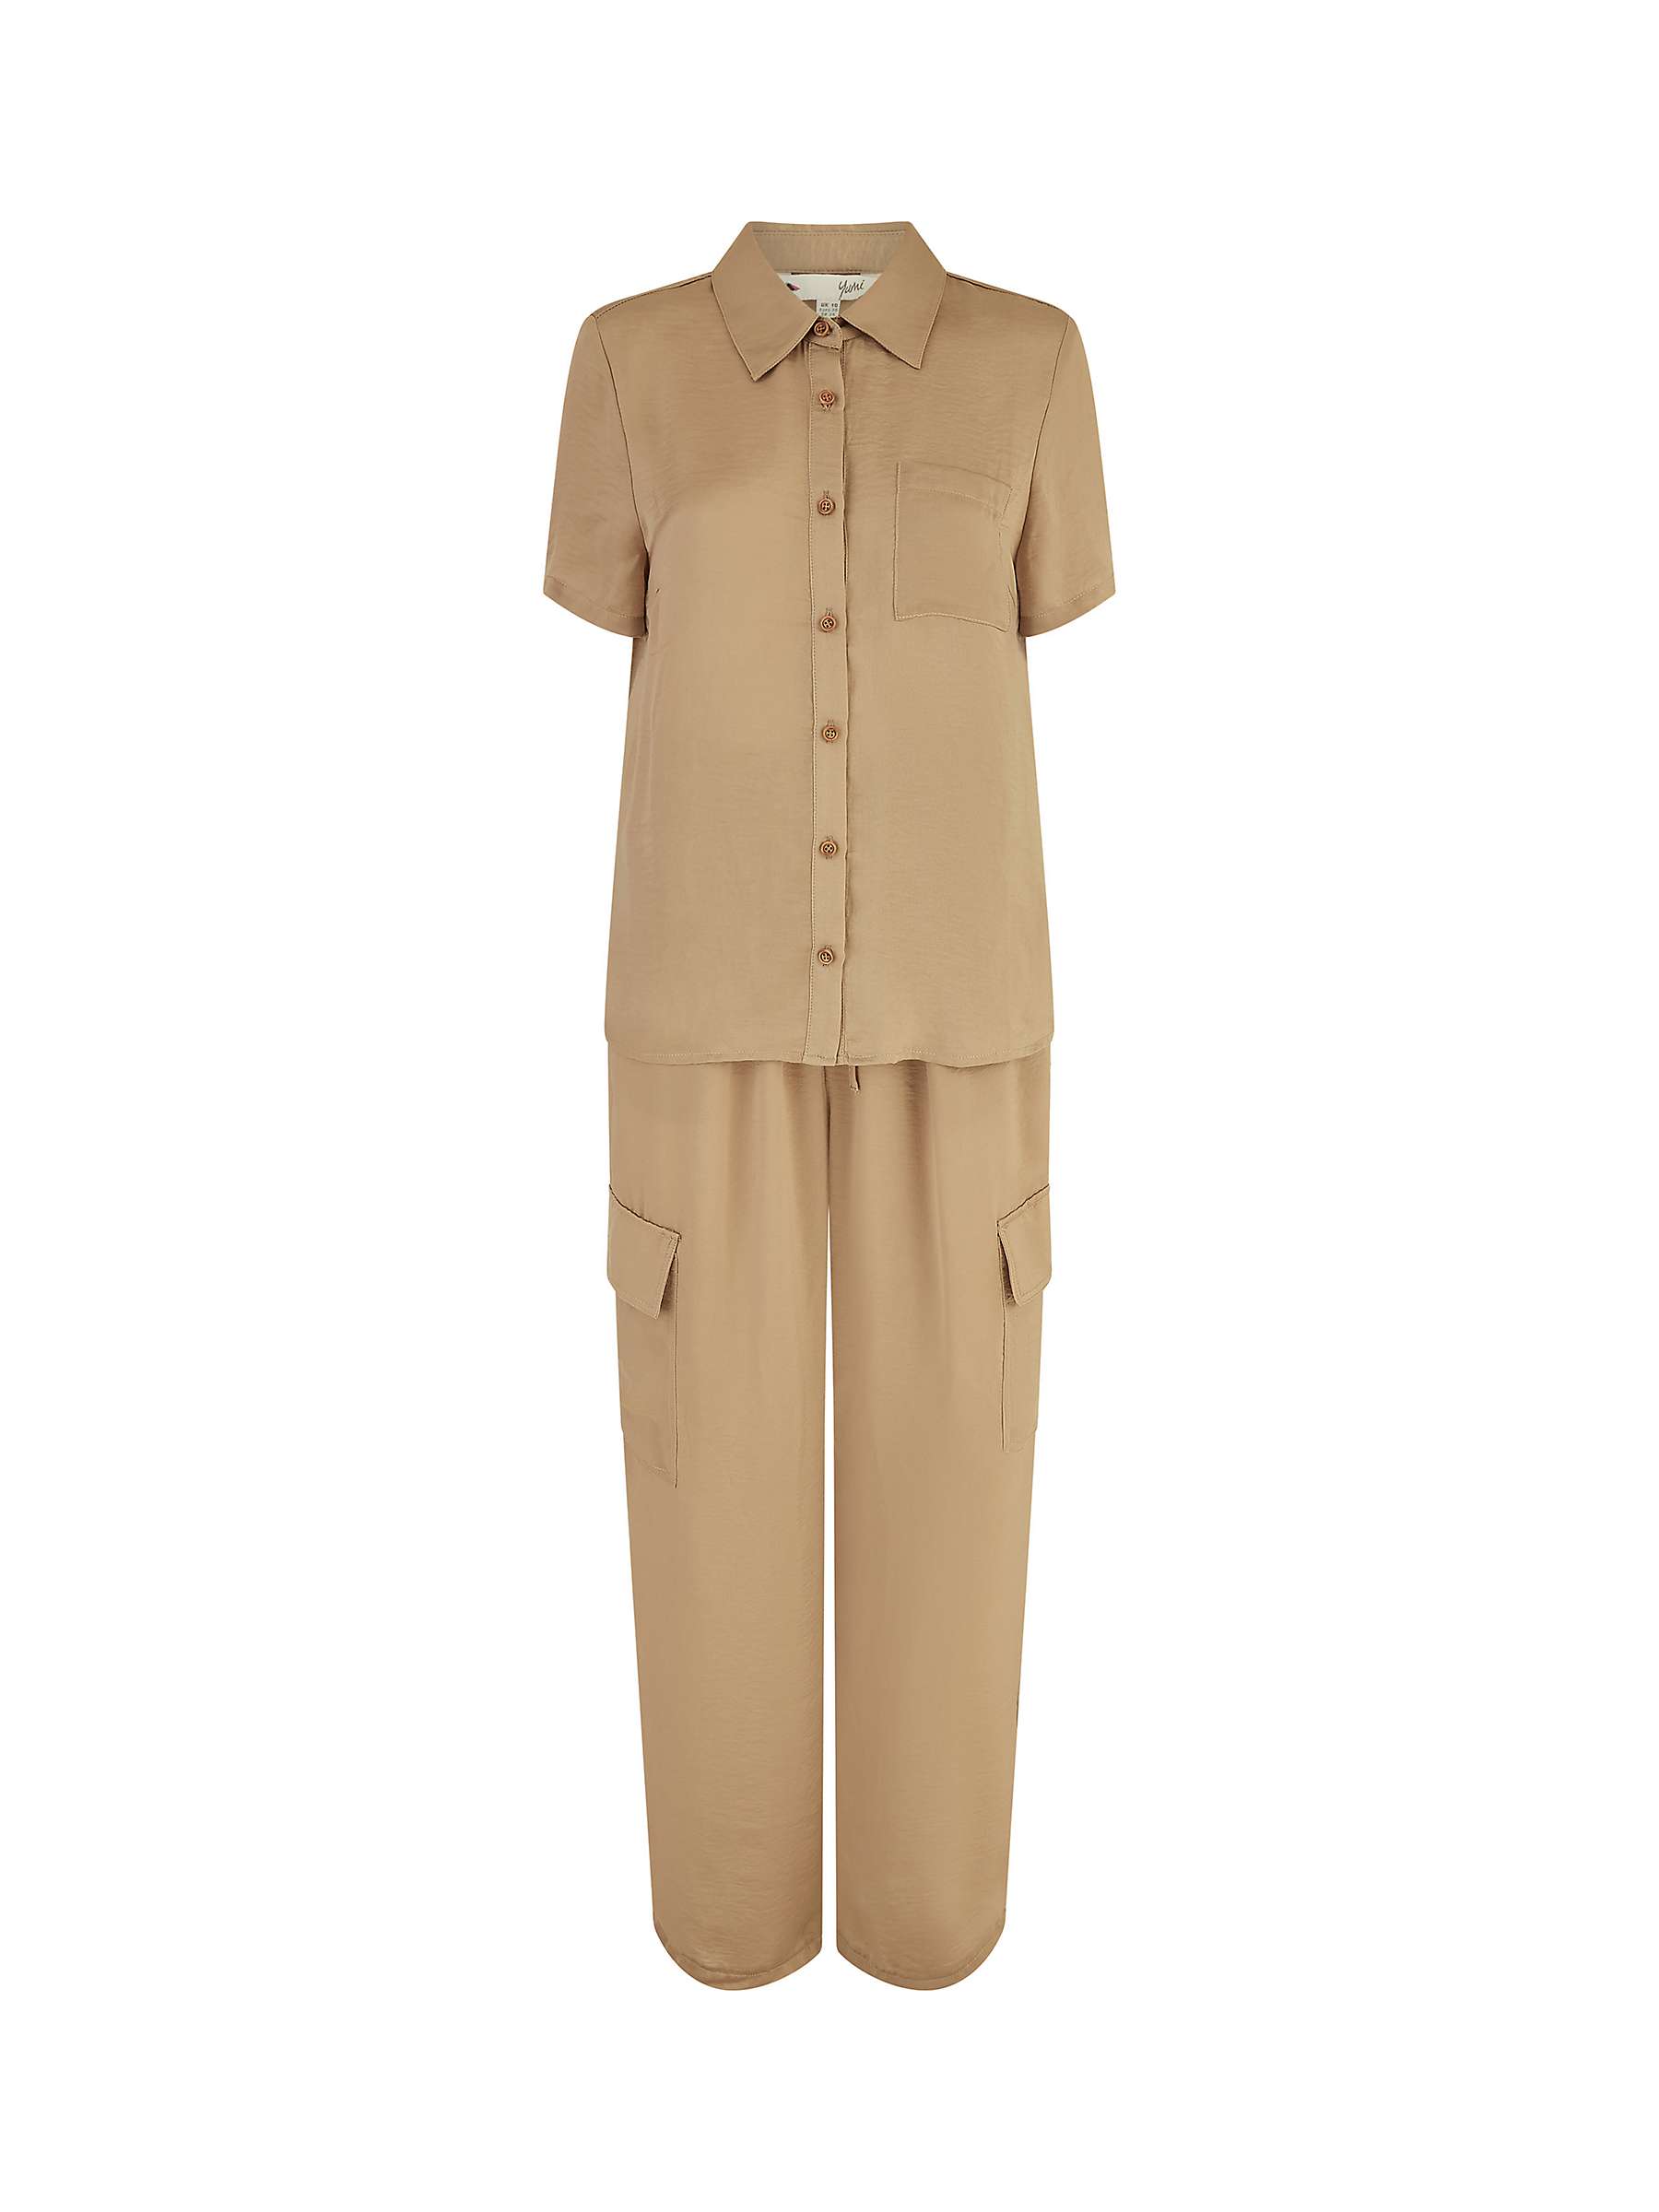 Buy Yumi Short Sleeve Relaxed Fit Shirt, Stone Online at johnlewis.com